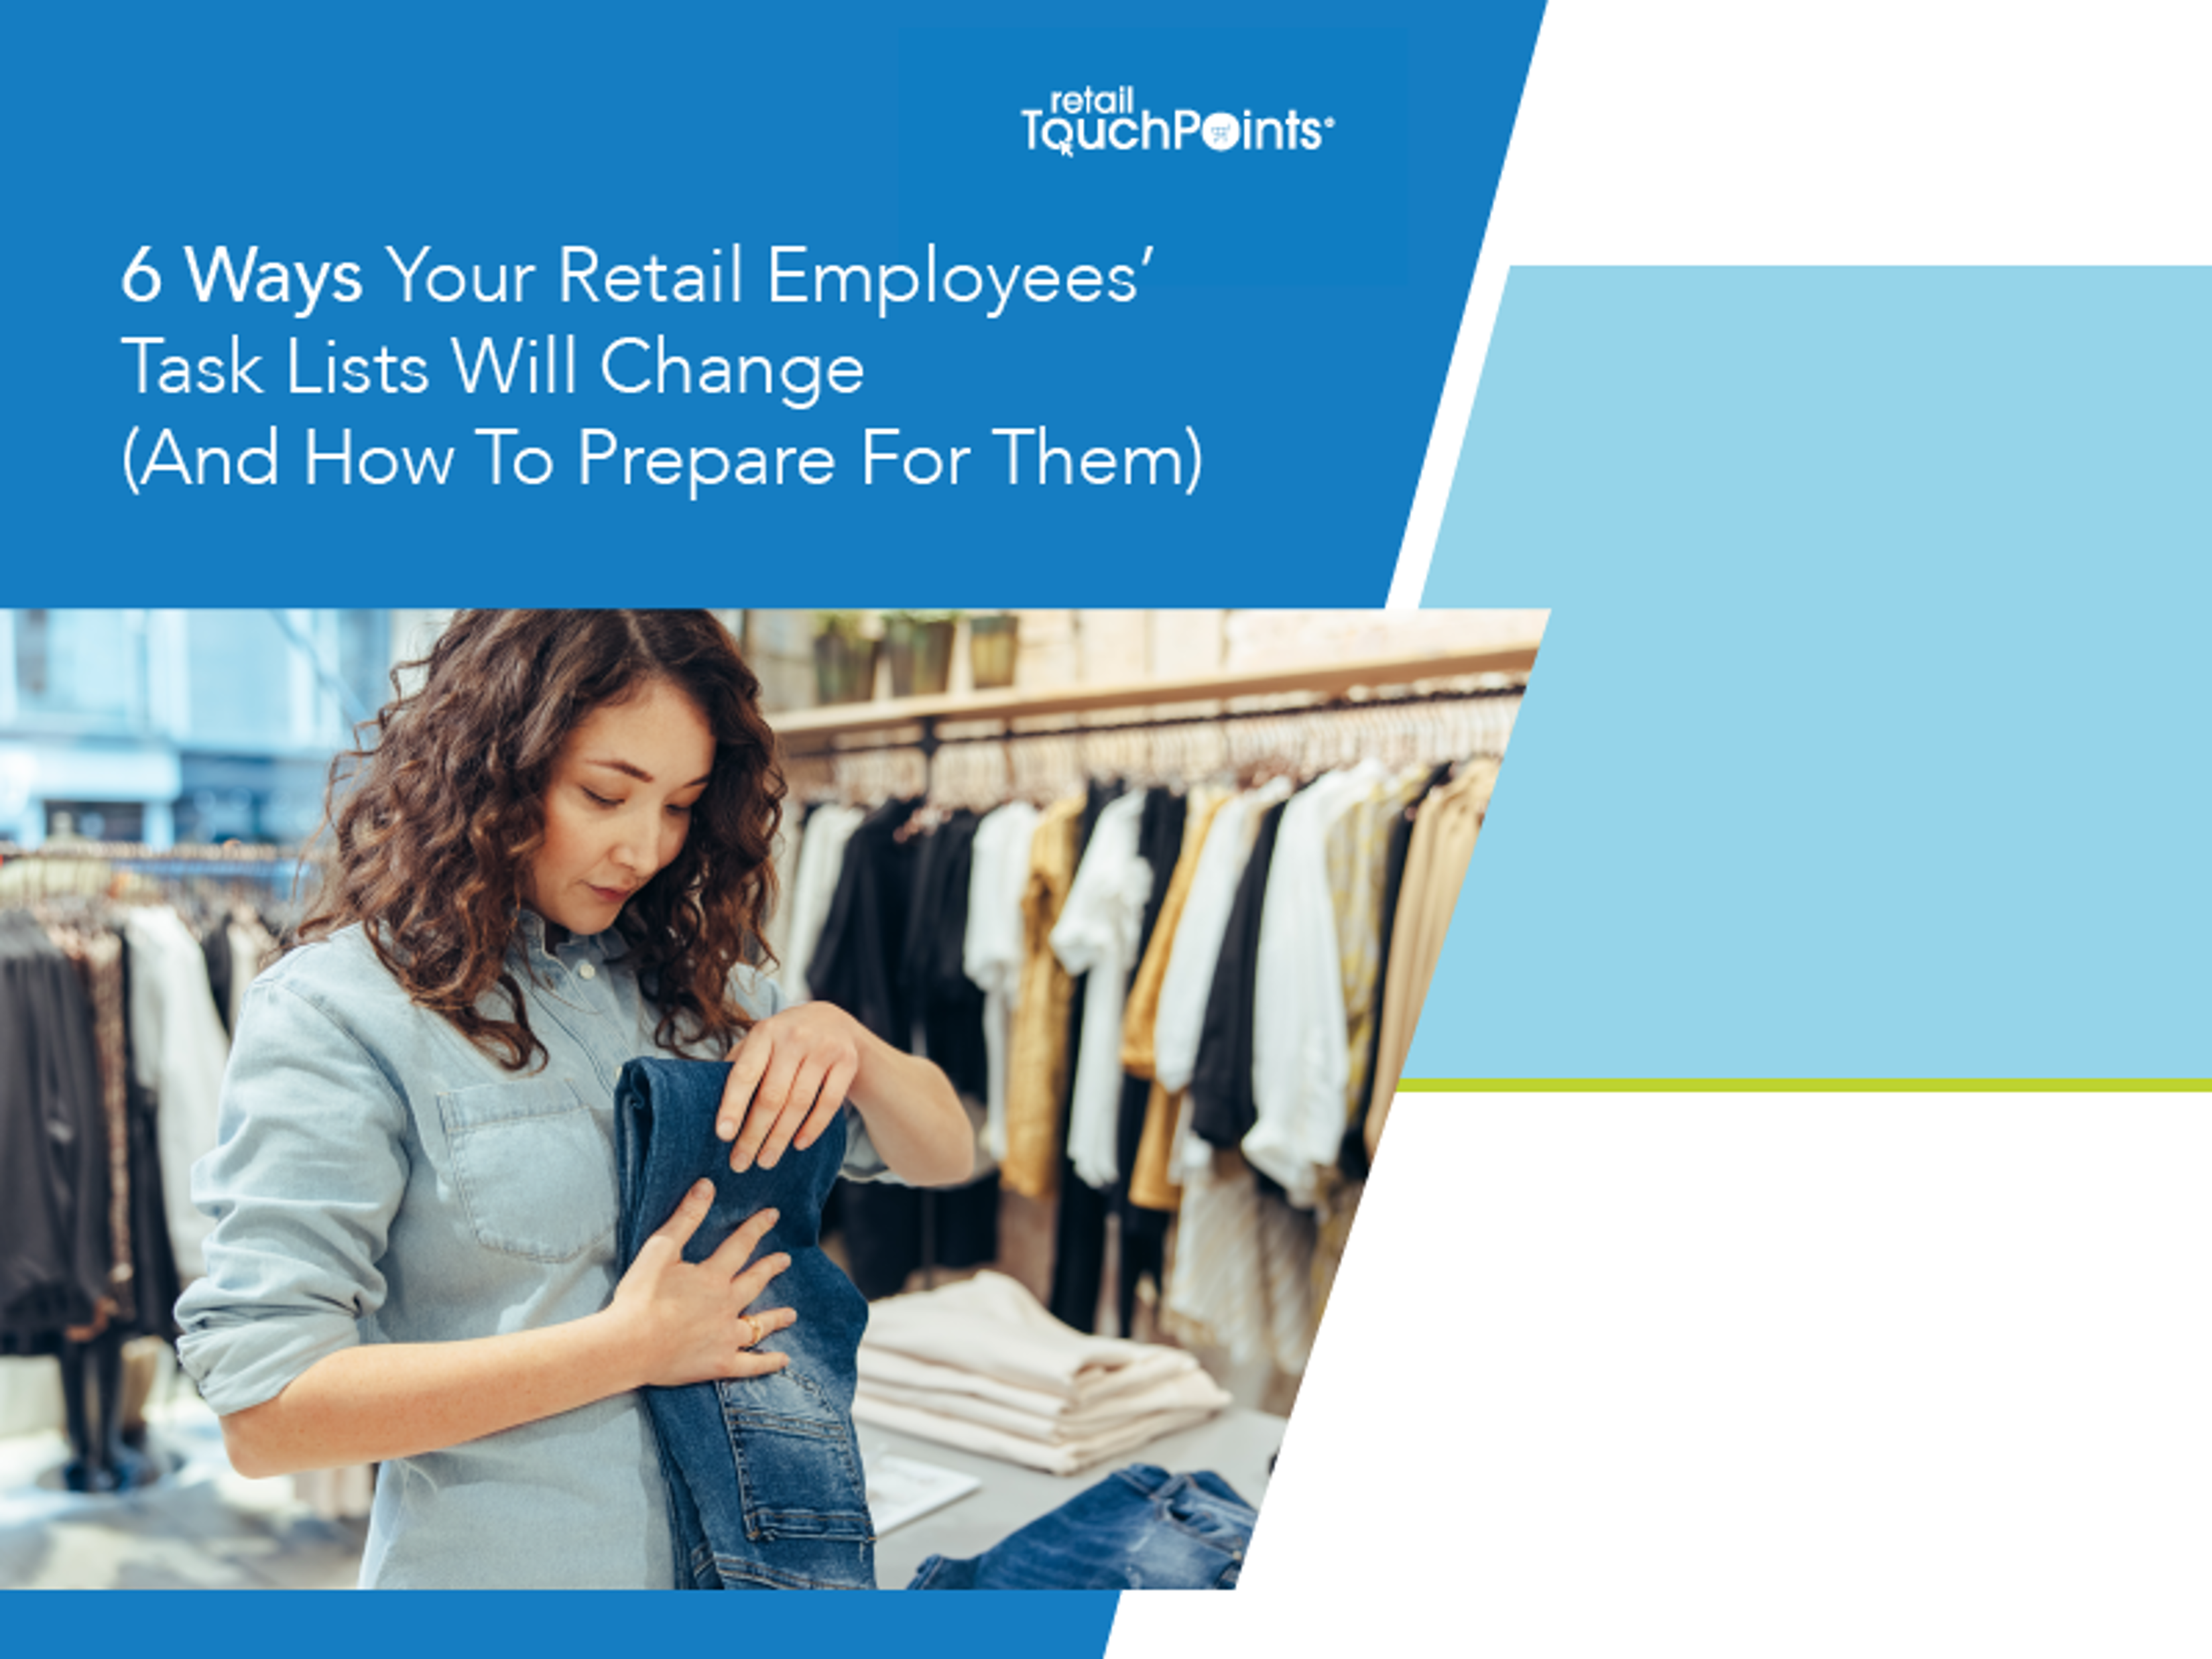 6 Ways your retail employees' task list will change